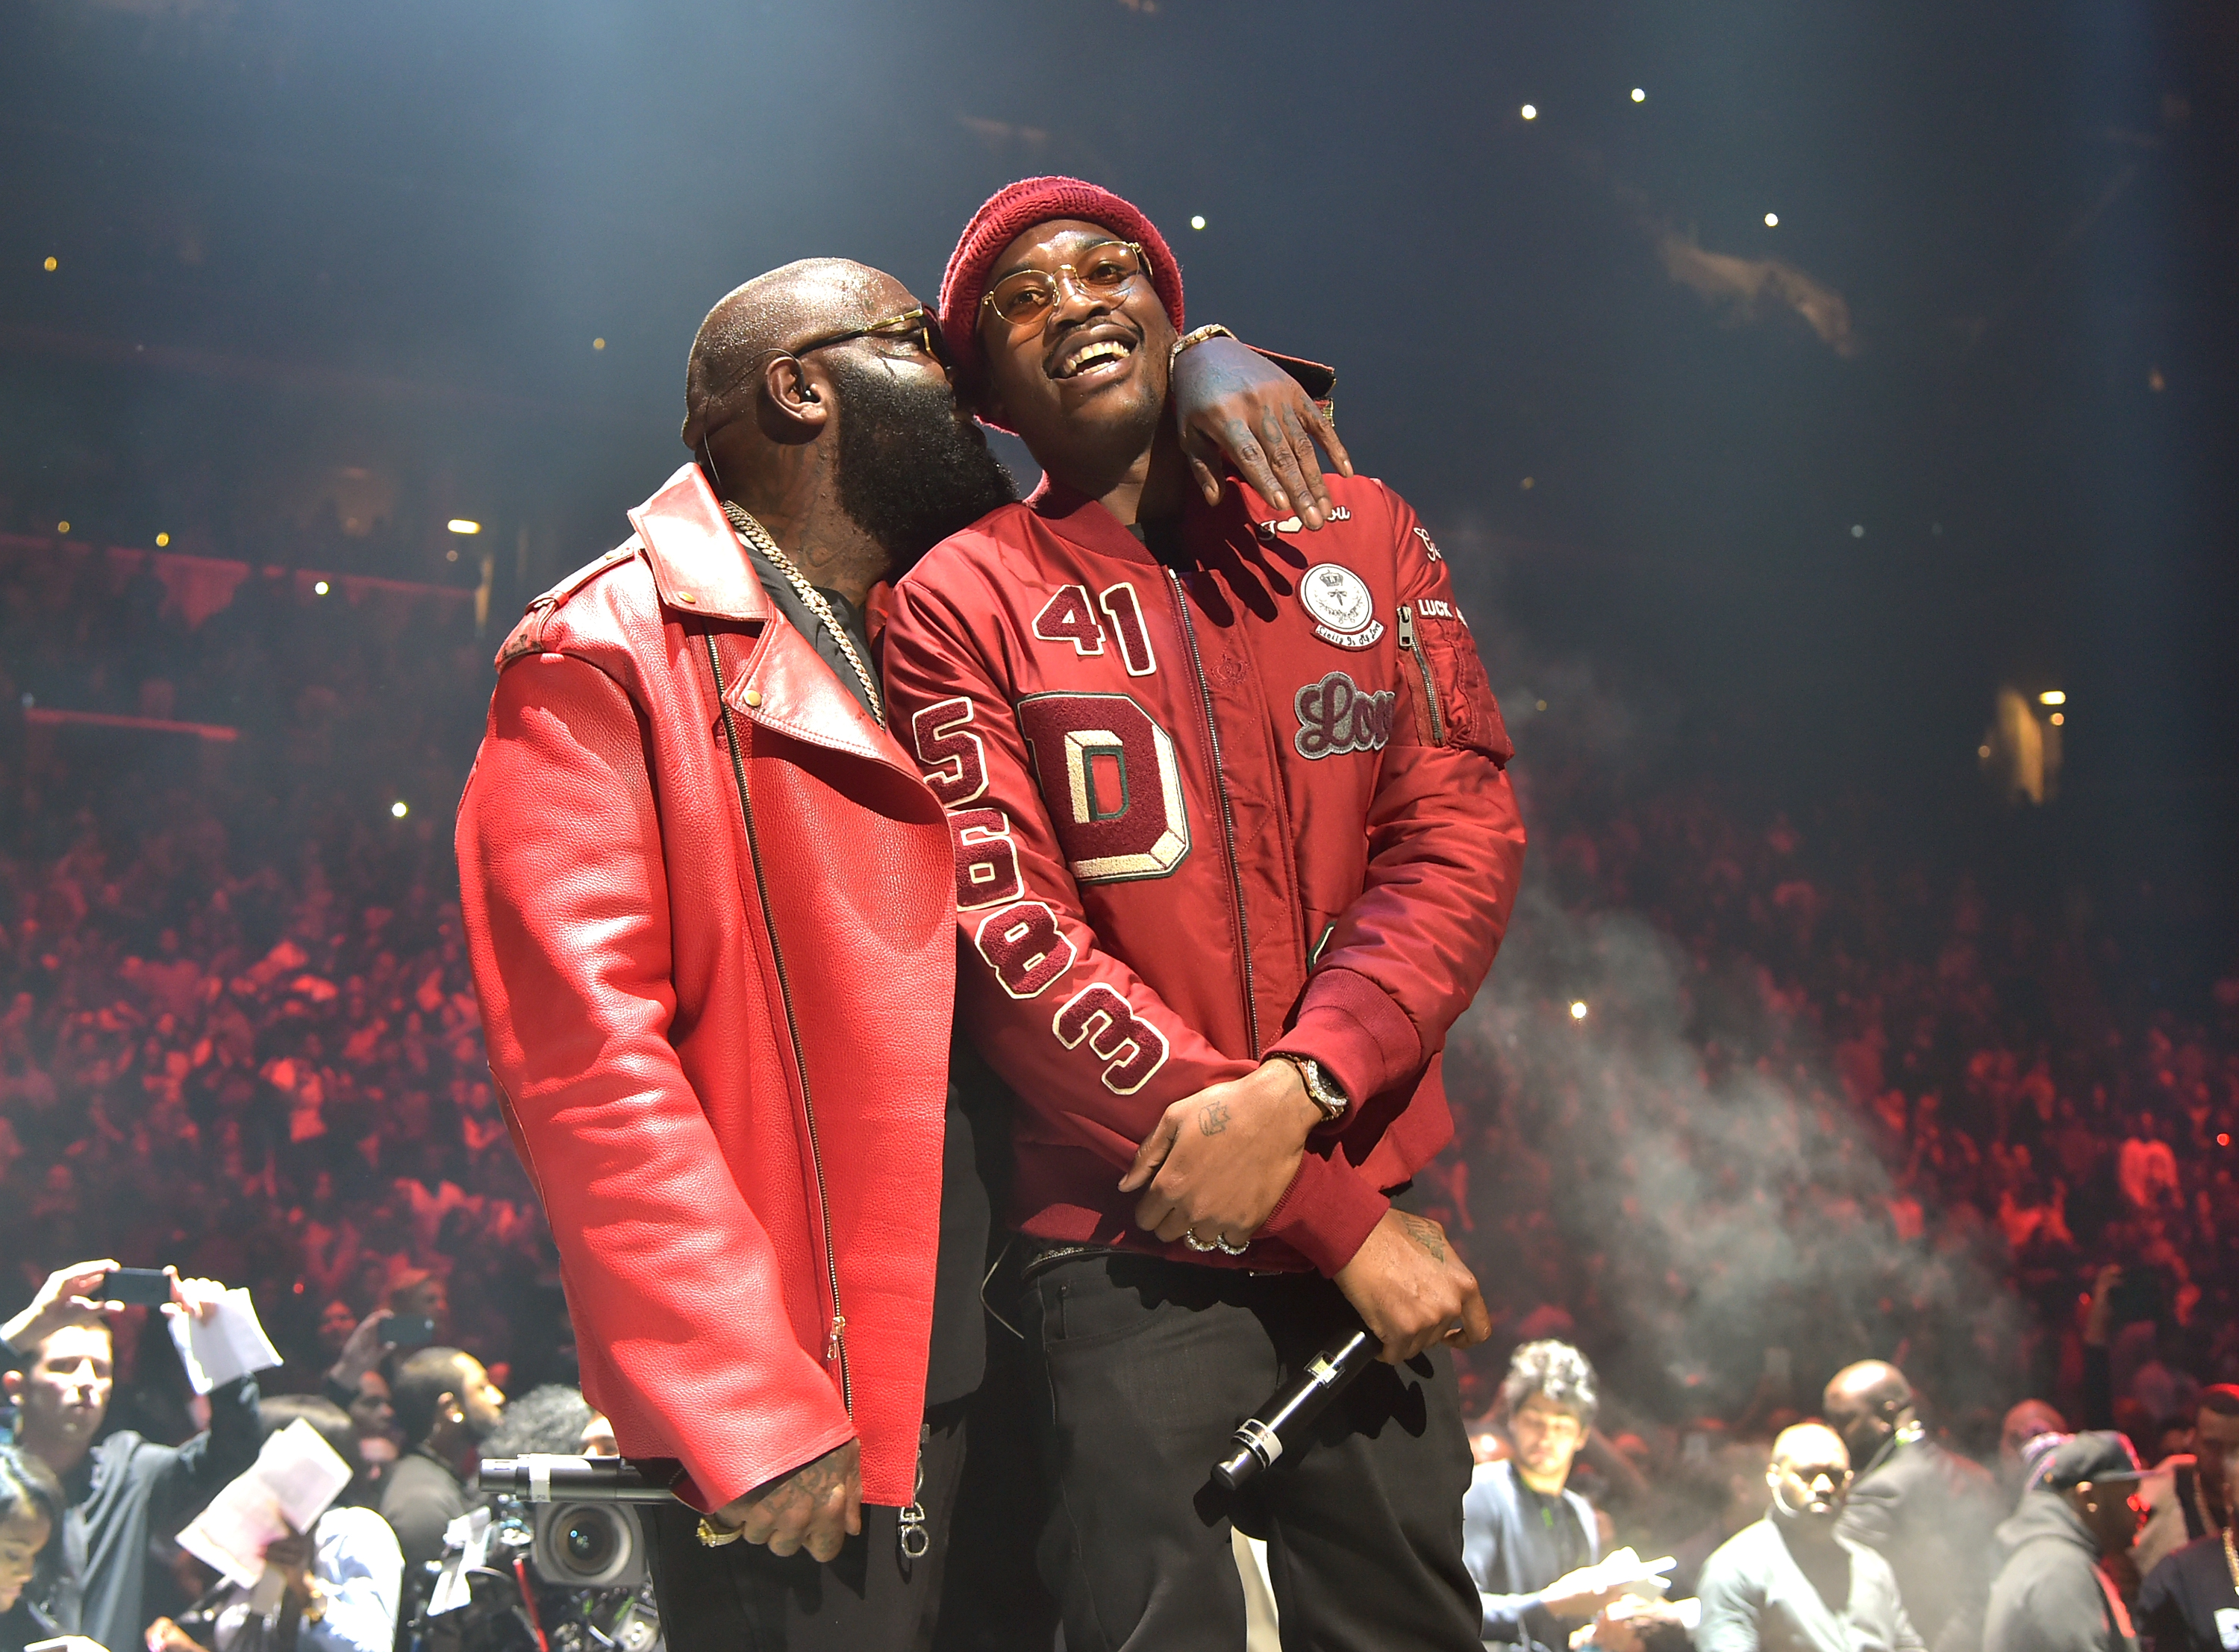 Rick Ross Will Take To The Philadelphia Streets In “Rally For Meek”